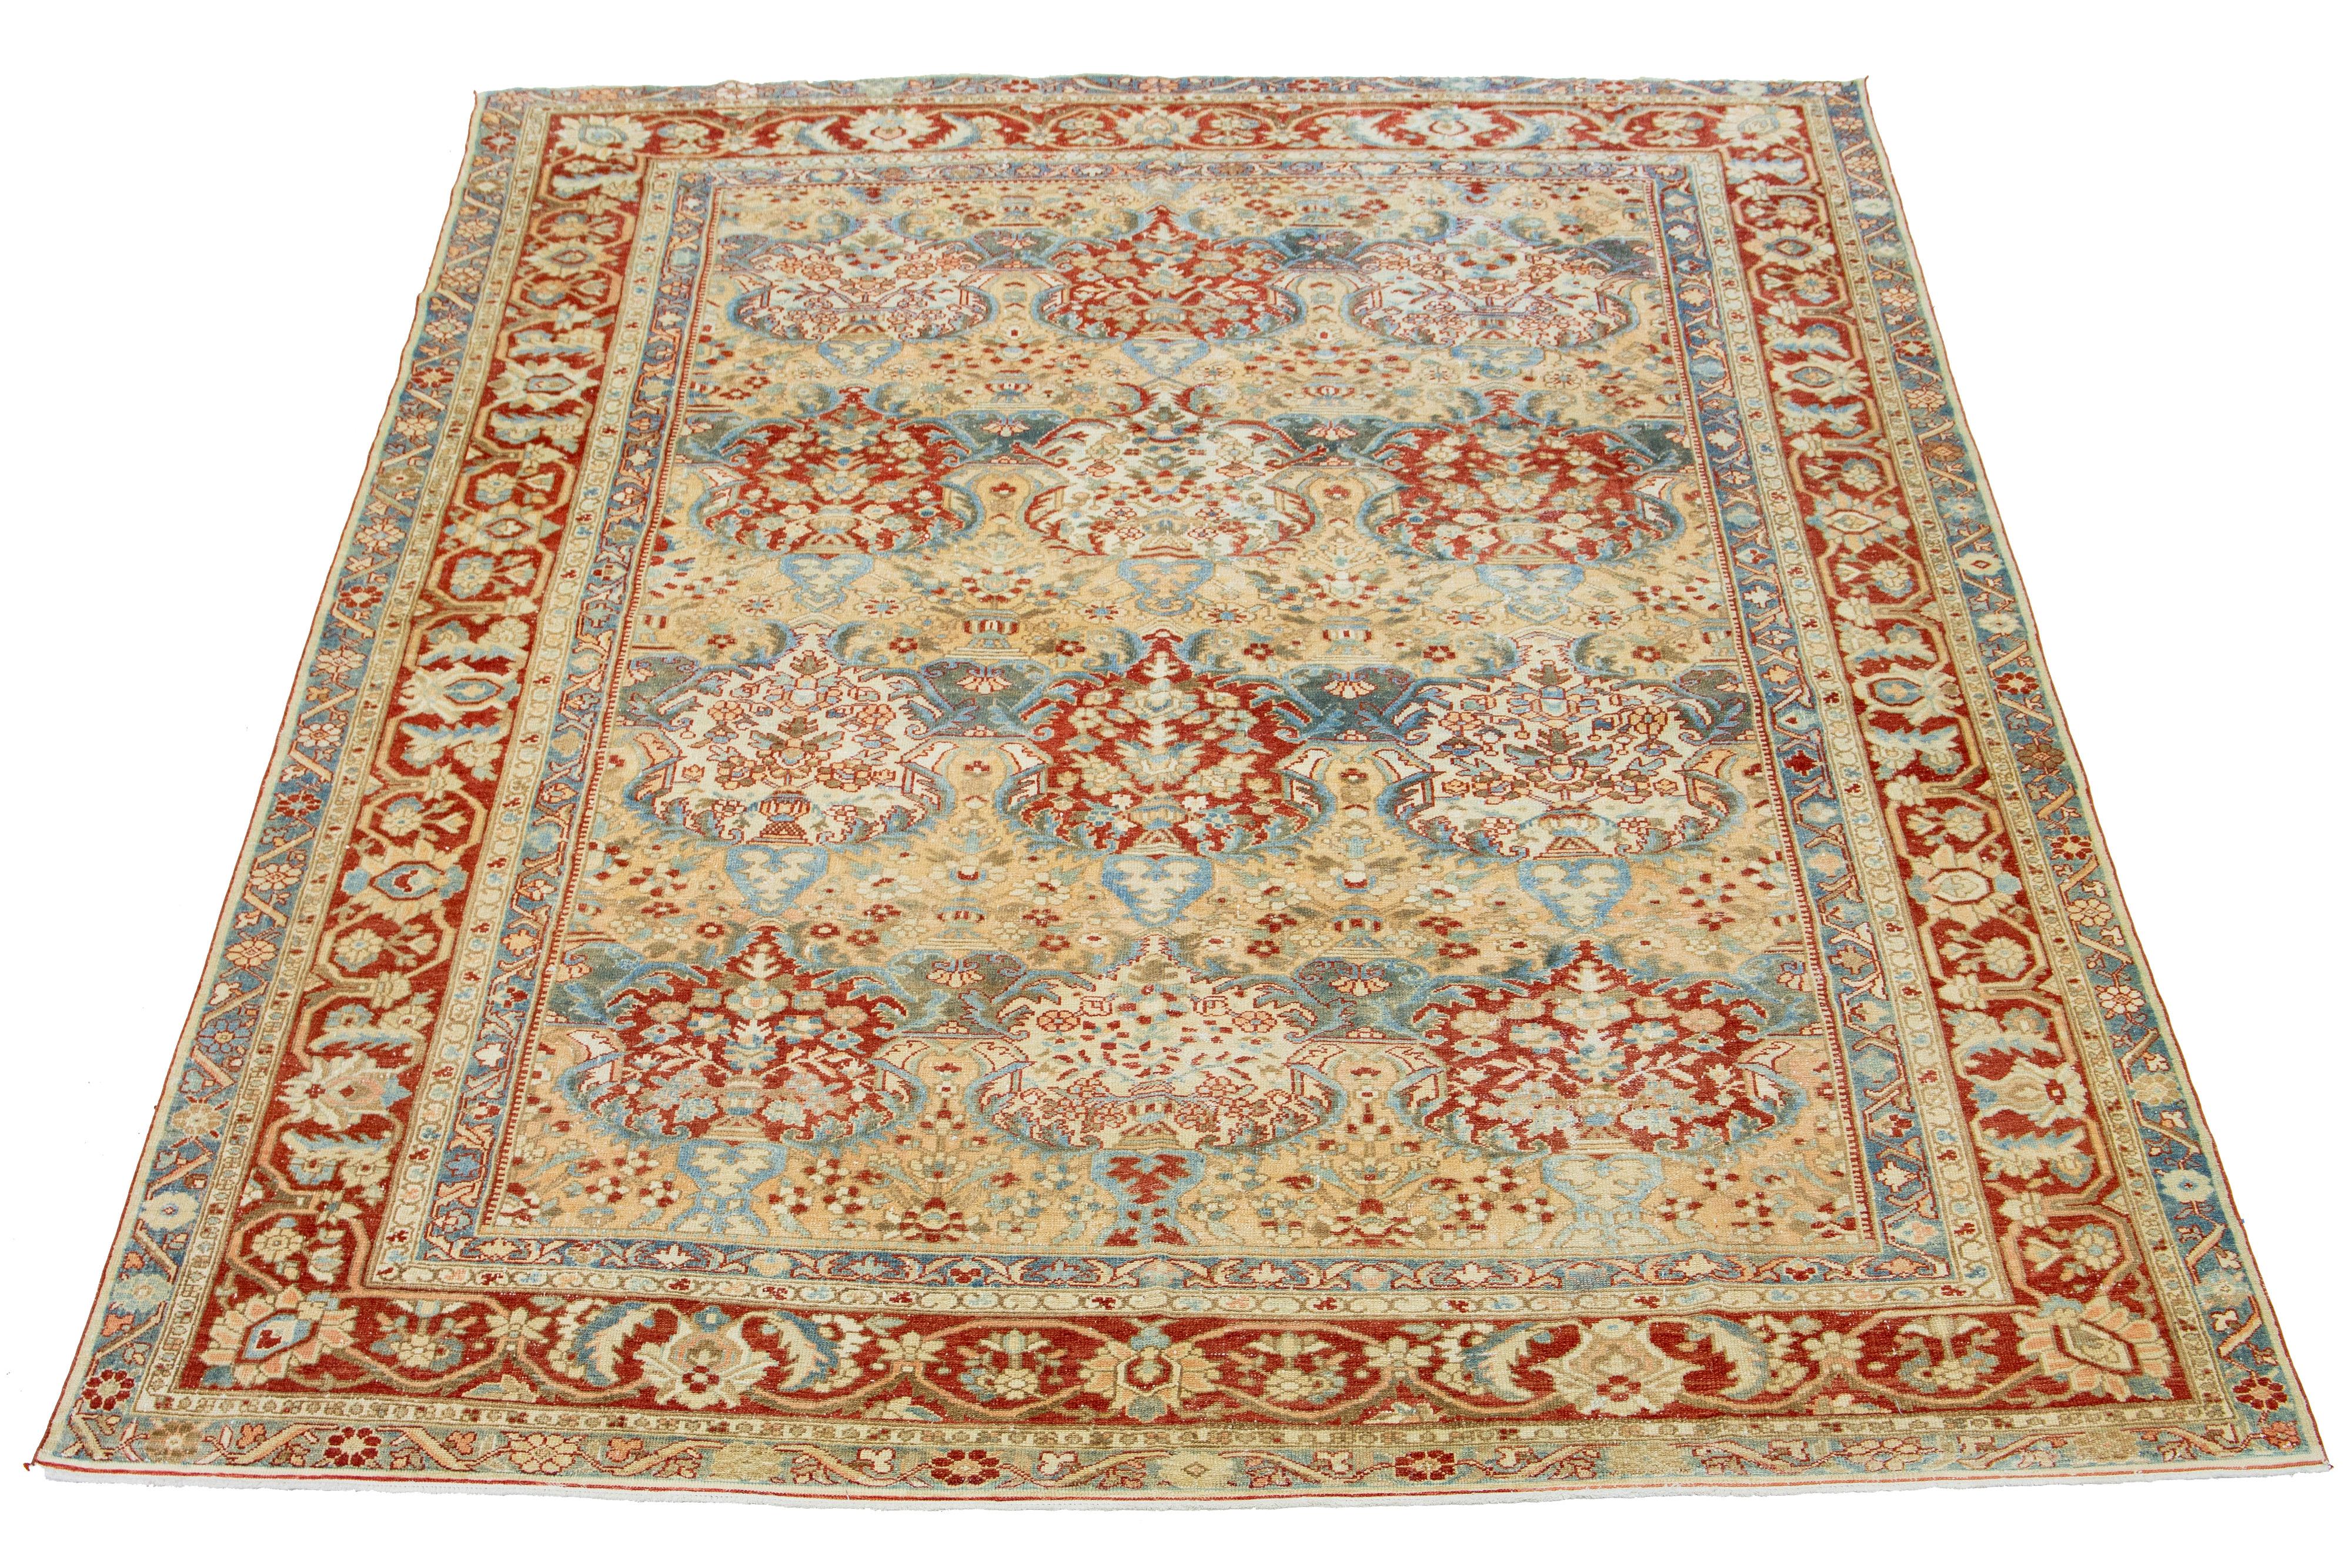 This is a beautiful antique Bakhtiari hand-knotted wool rug with a tan-colored field. This Persian piece features a classic multi-floral pattern in blue, peach, and red-rust hues.

This rug measures 10'9